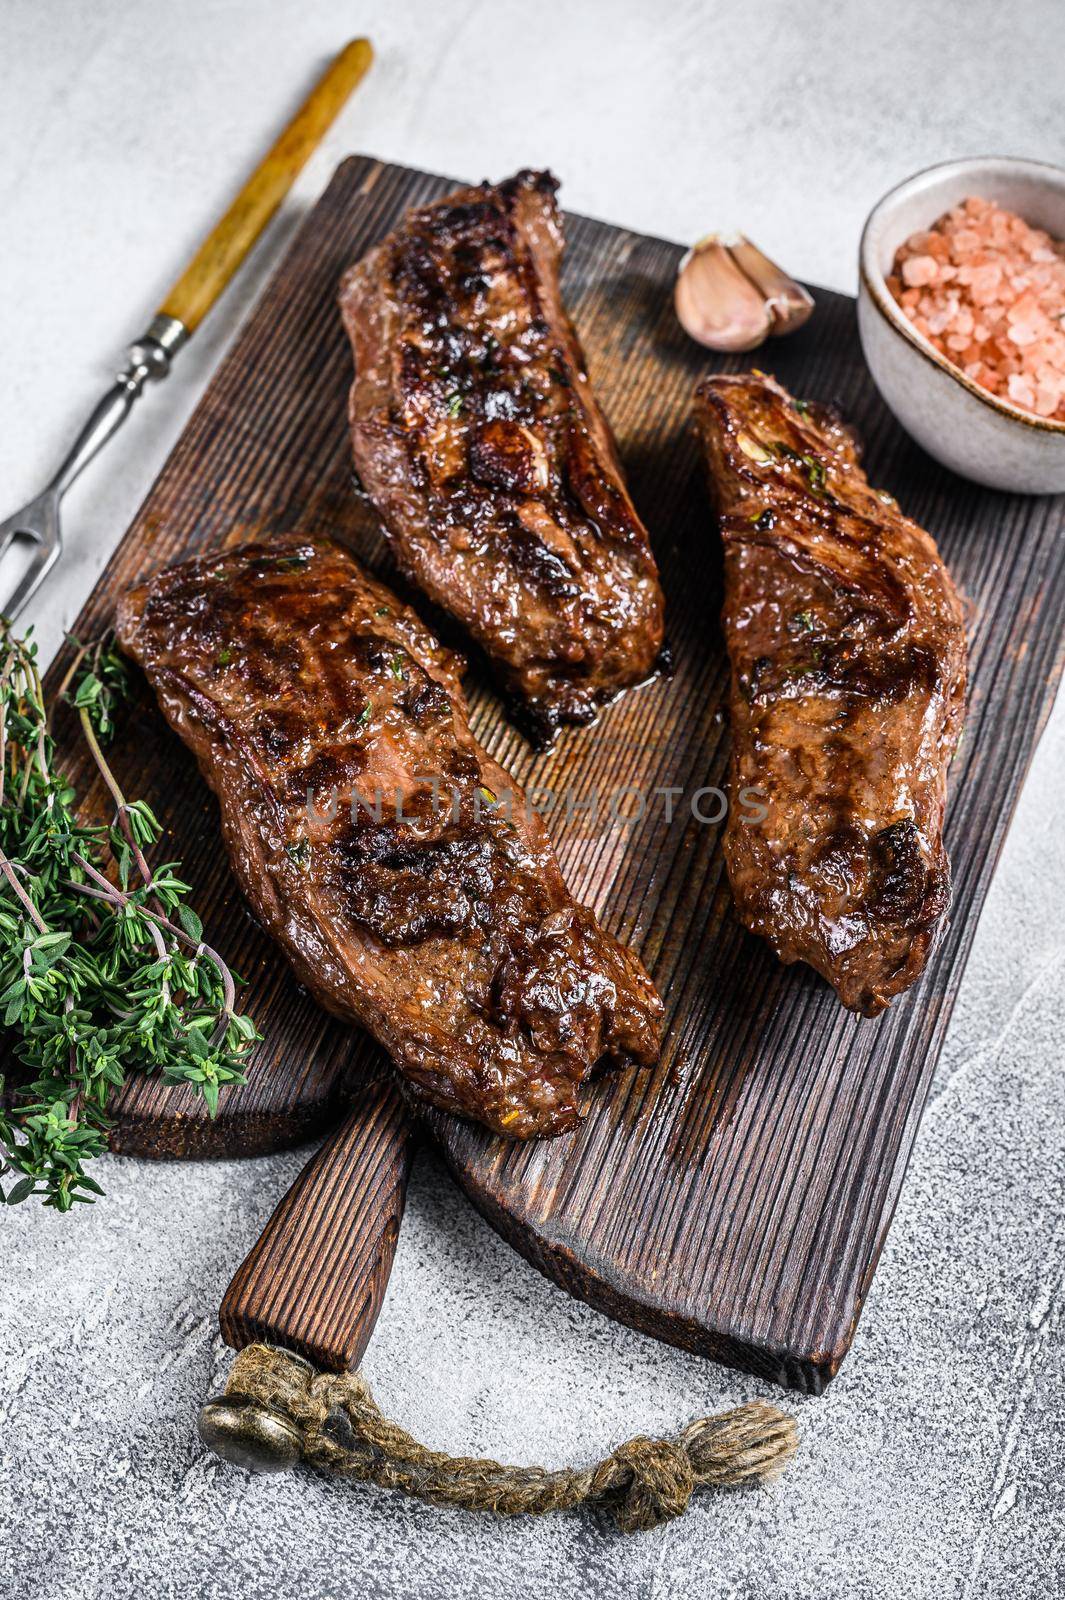 Grilled brisket steaks in bbq sauce on a wooden board. White background. Top view by Composter